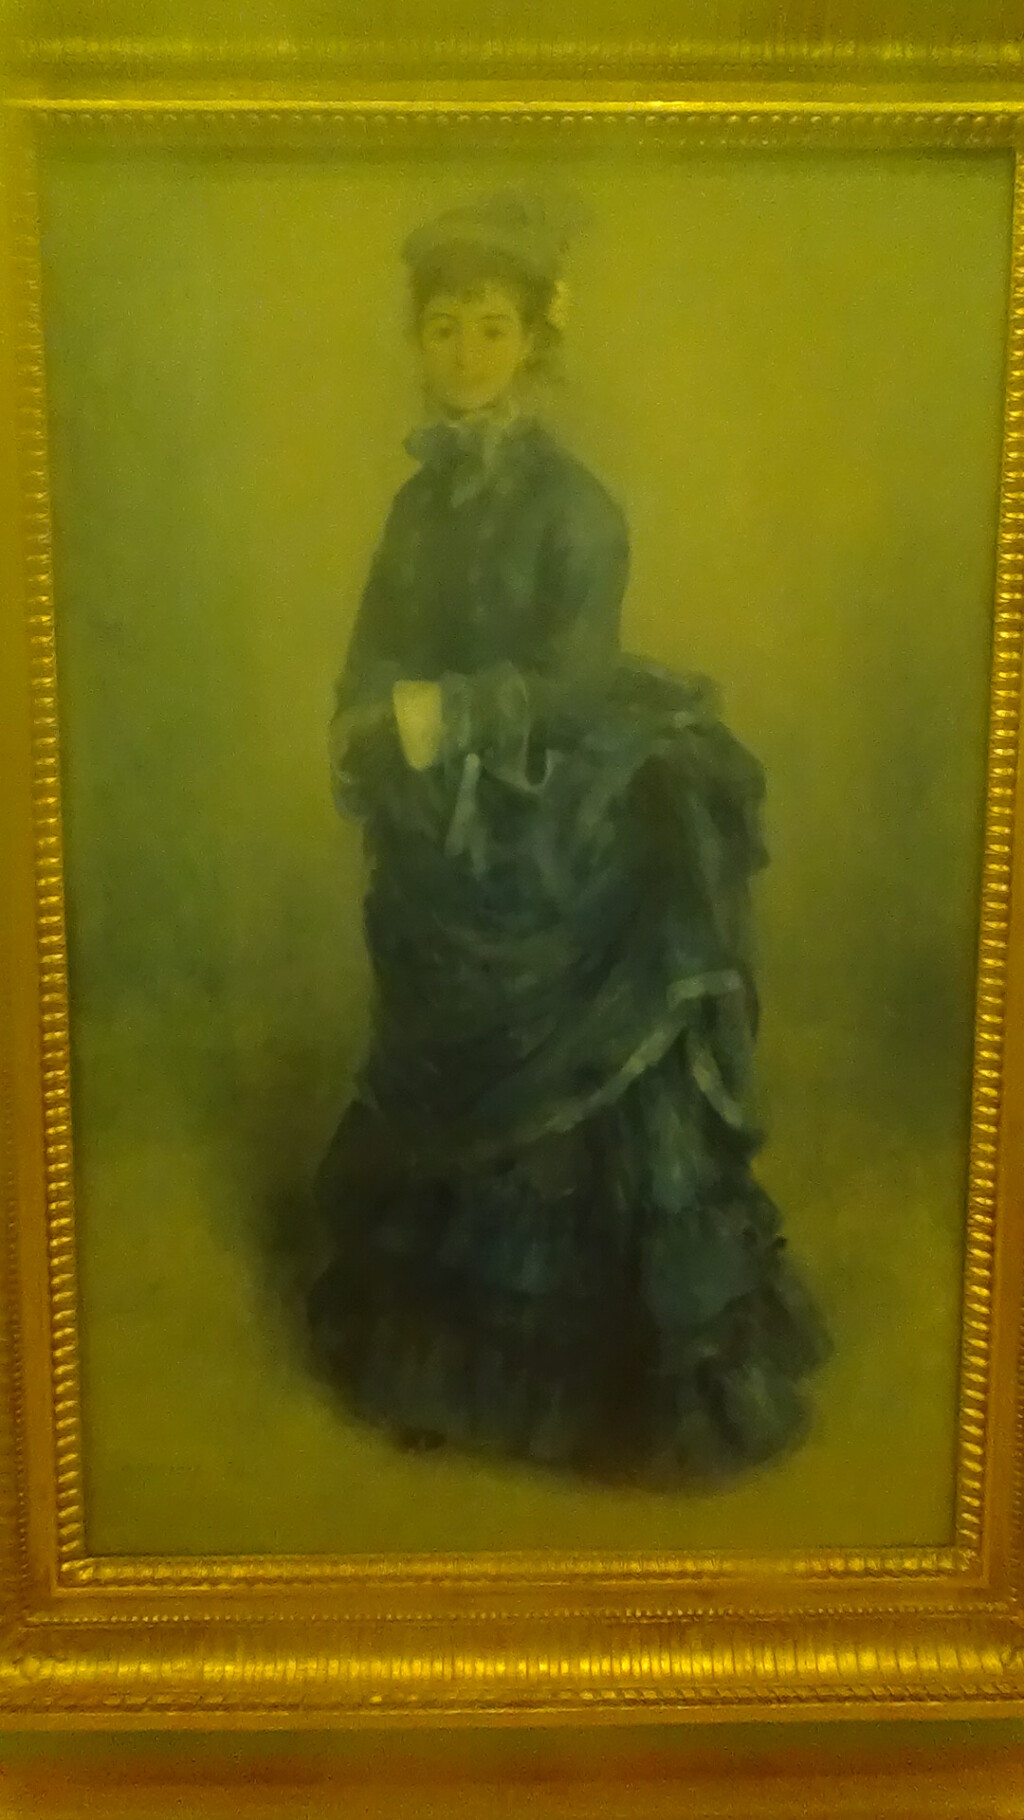 Photograph of the Renoir painting La Parisienne viewed through a yellow filter